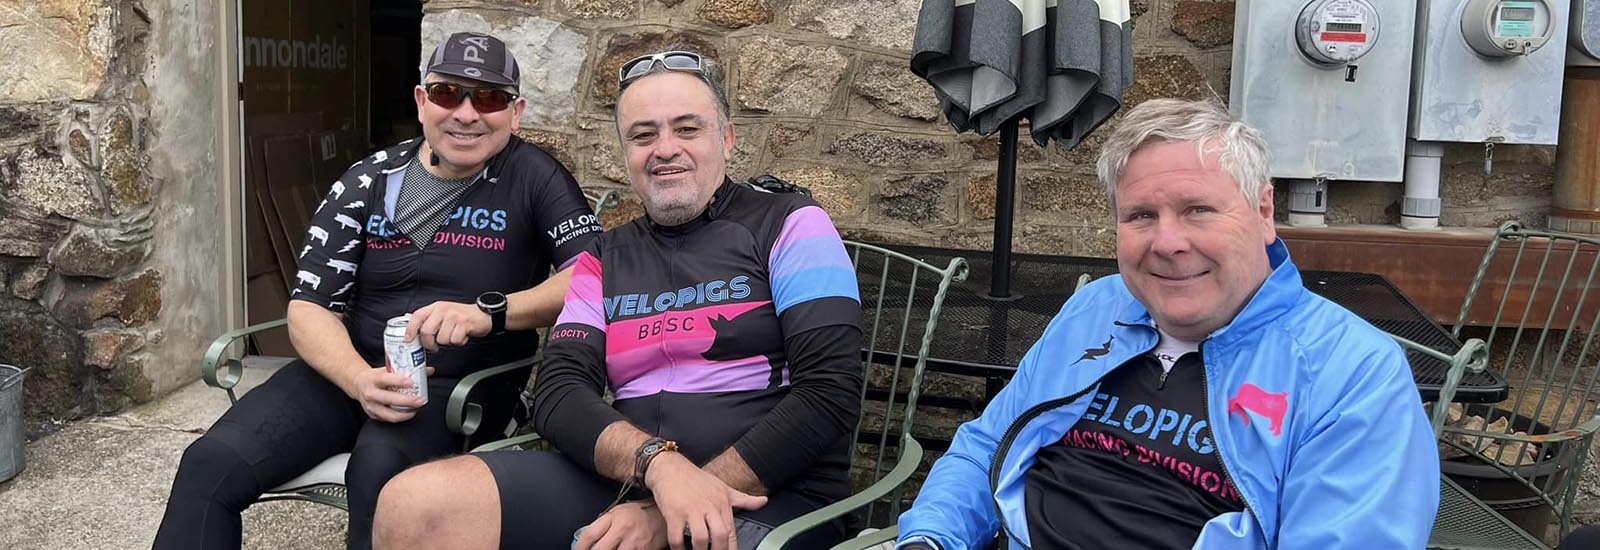 Three VeloPigs member relaxing after a great gravel ride